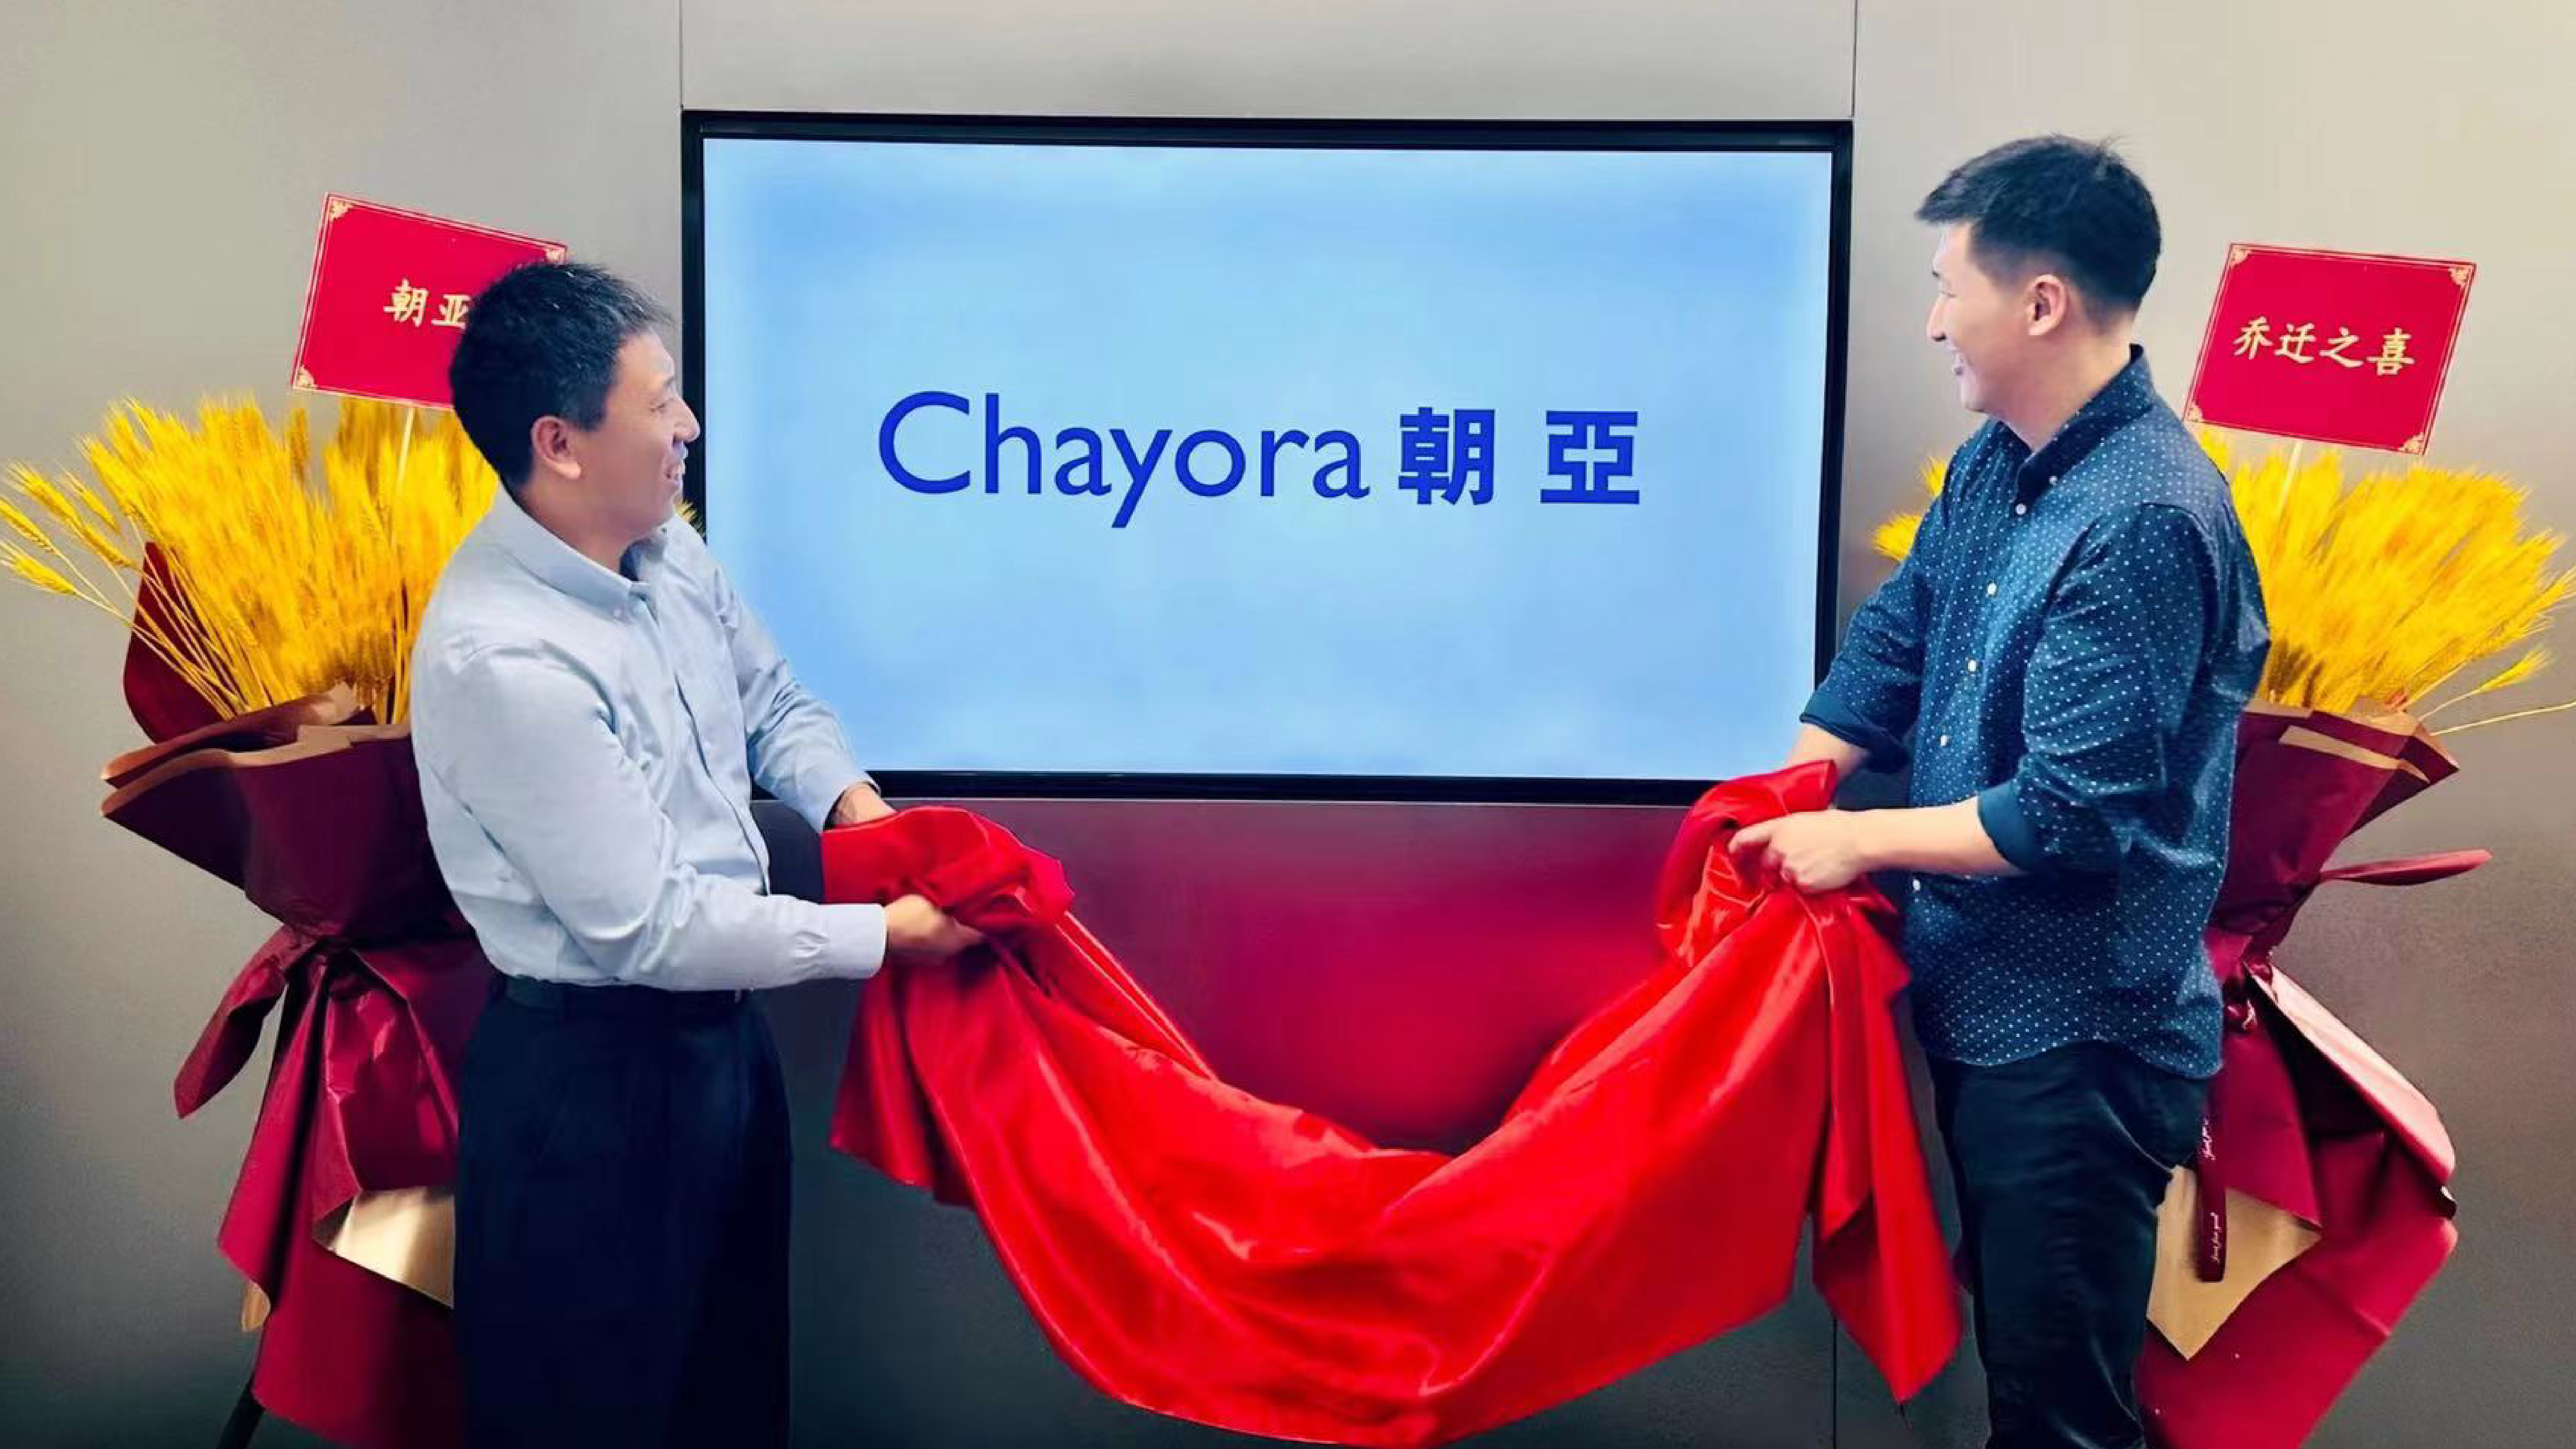 Chayora's CEO, James Wei (left) and CFO, Rodger Du (right) at the ribbon-cutting ceremony of Chayora's New Beijing Office